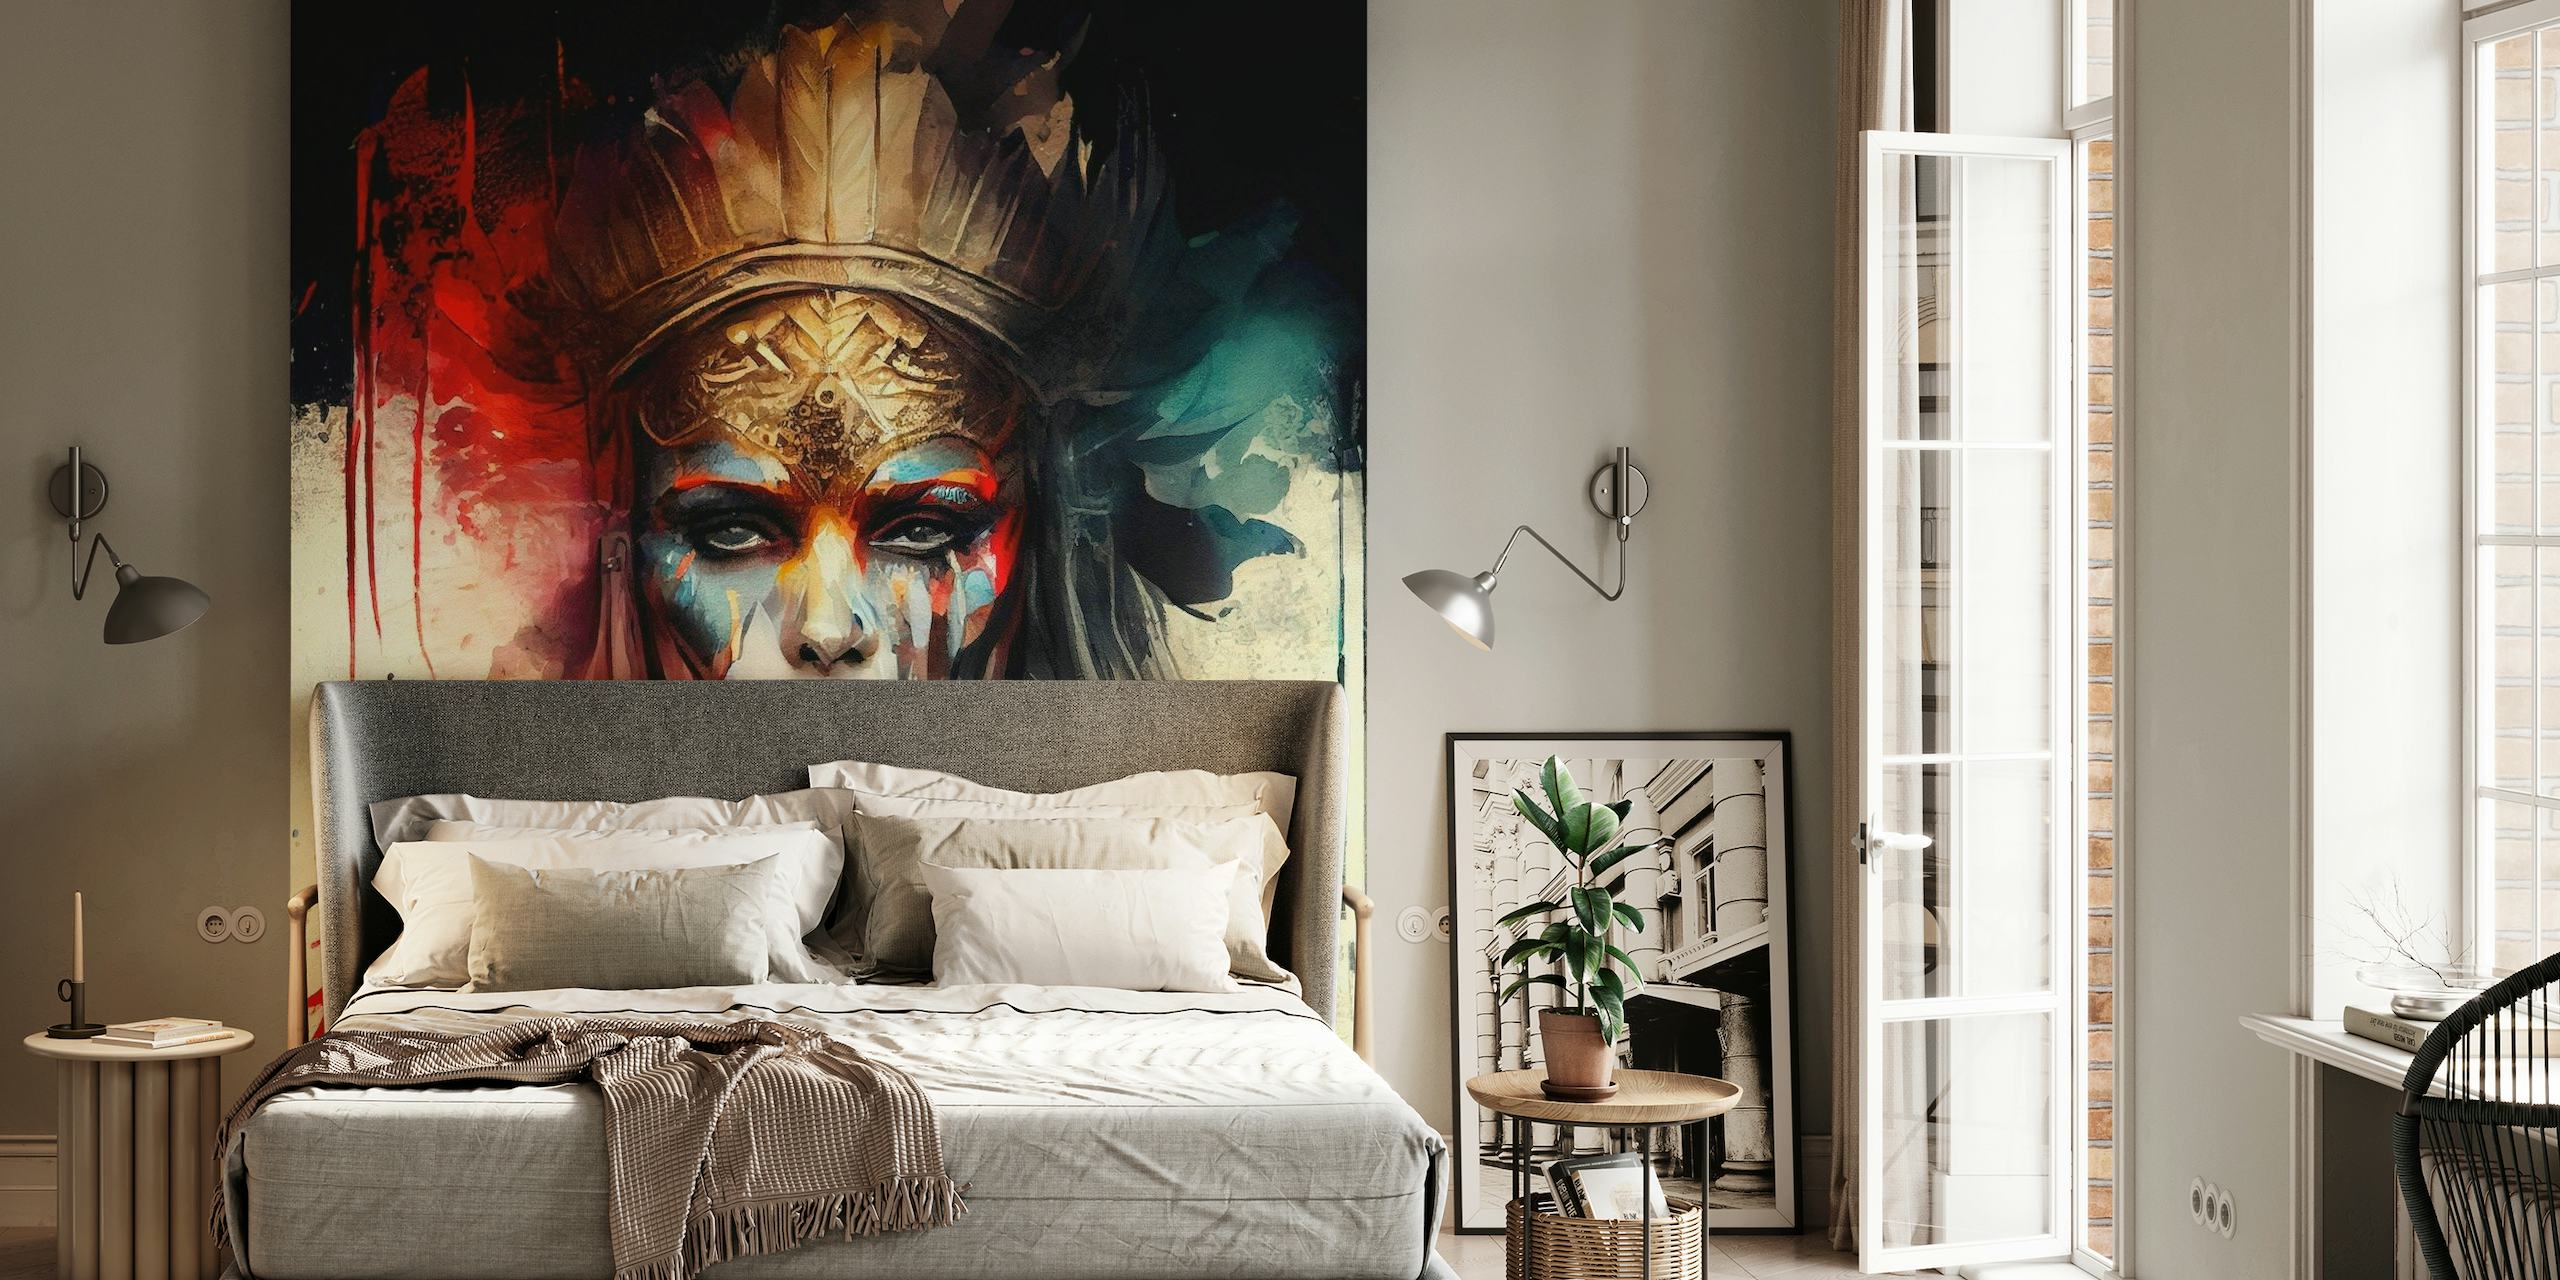 Artistic wall mural of a powerful warrior woman with a tribal headdress and colorful paint streaks